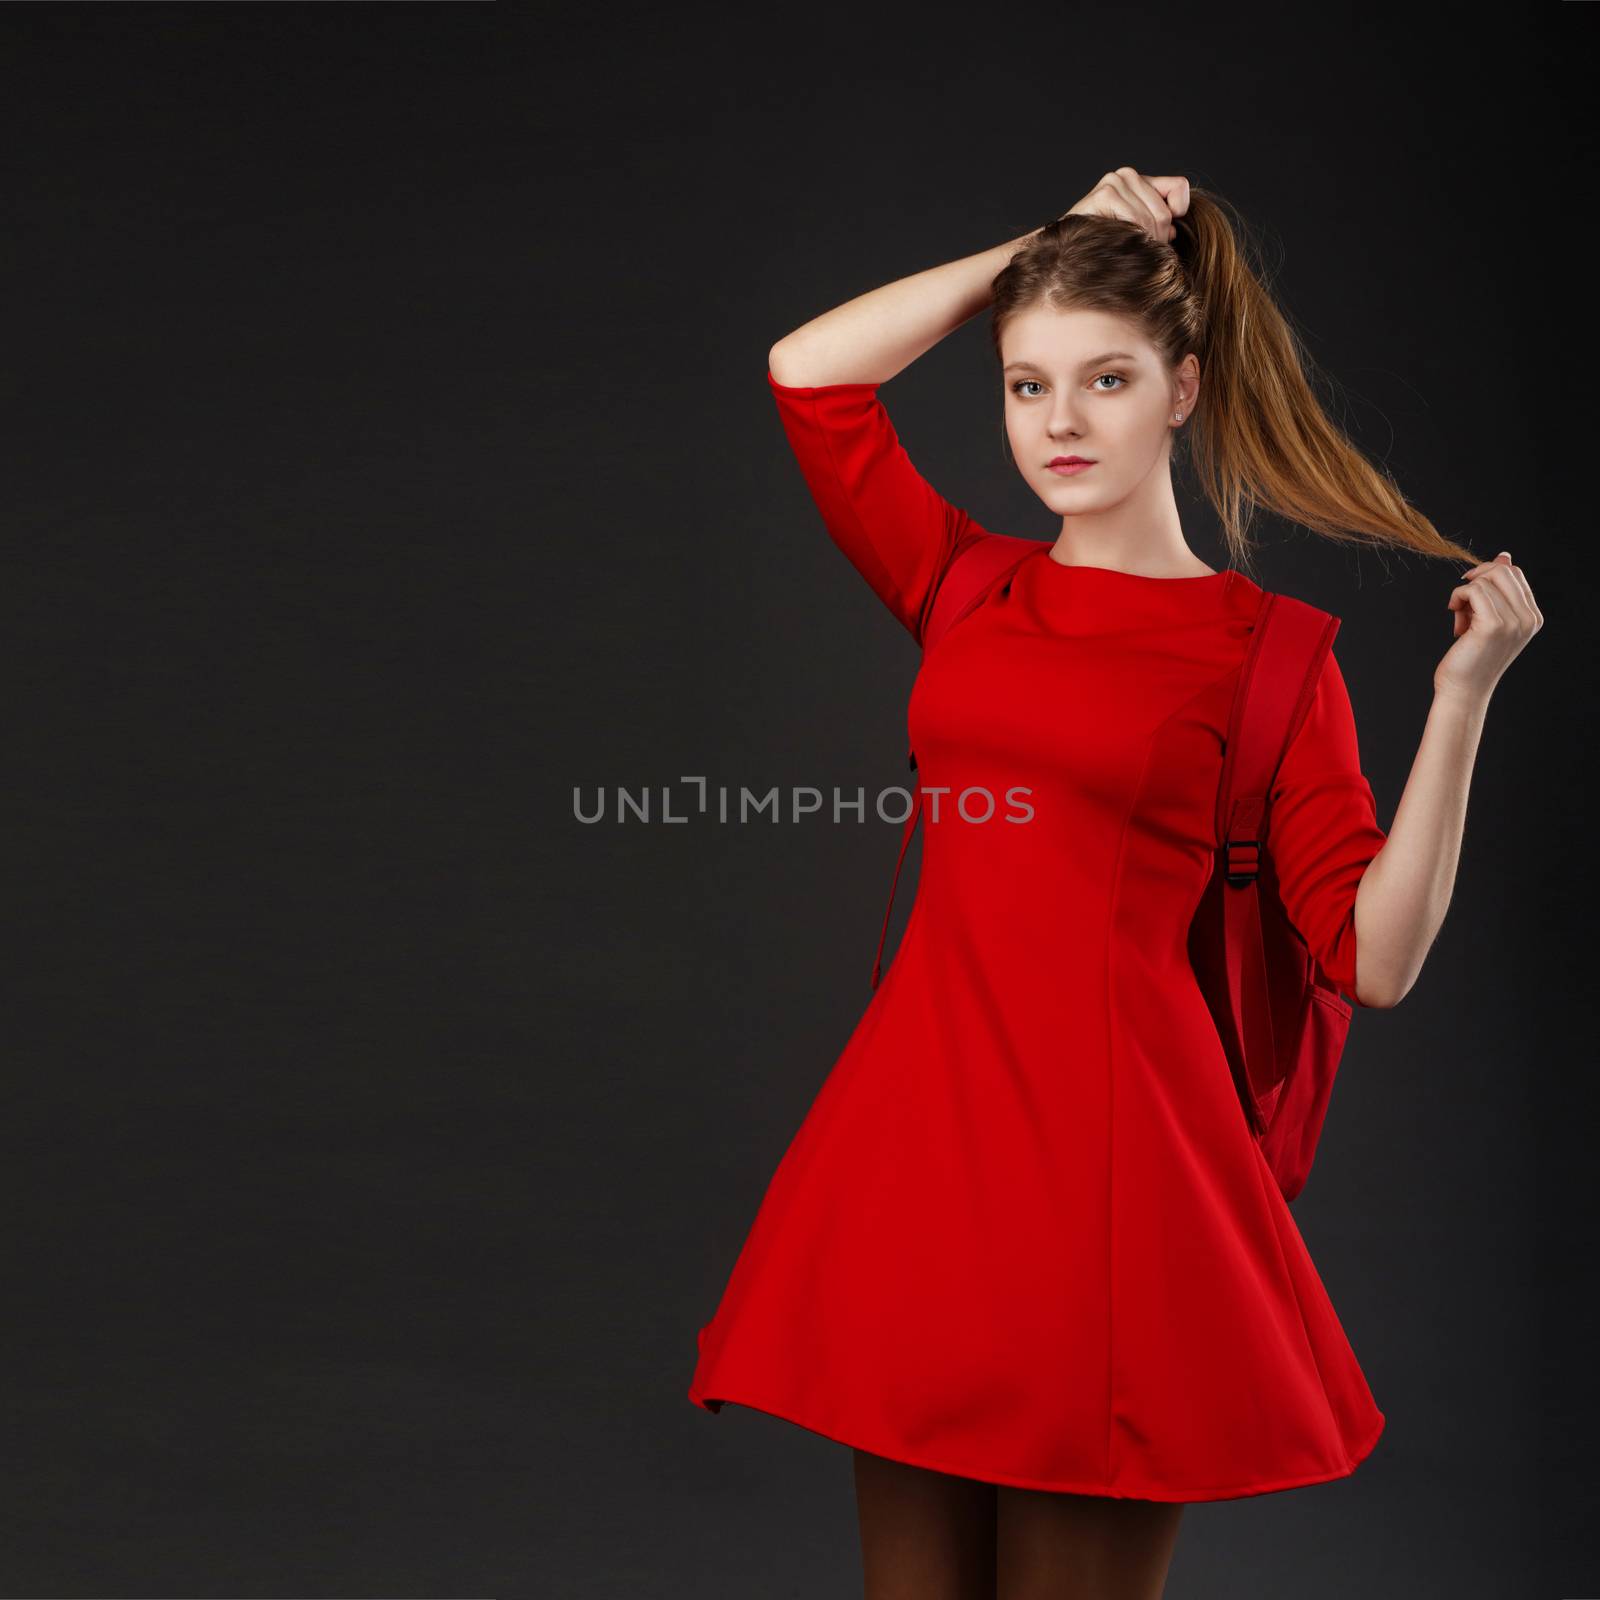 Portrait of a beautiful girl with long hair in a red dress